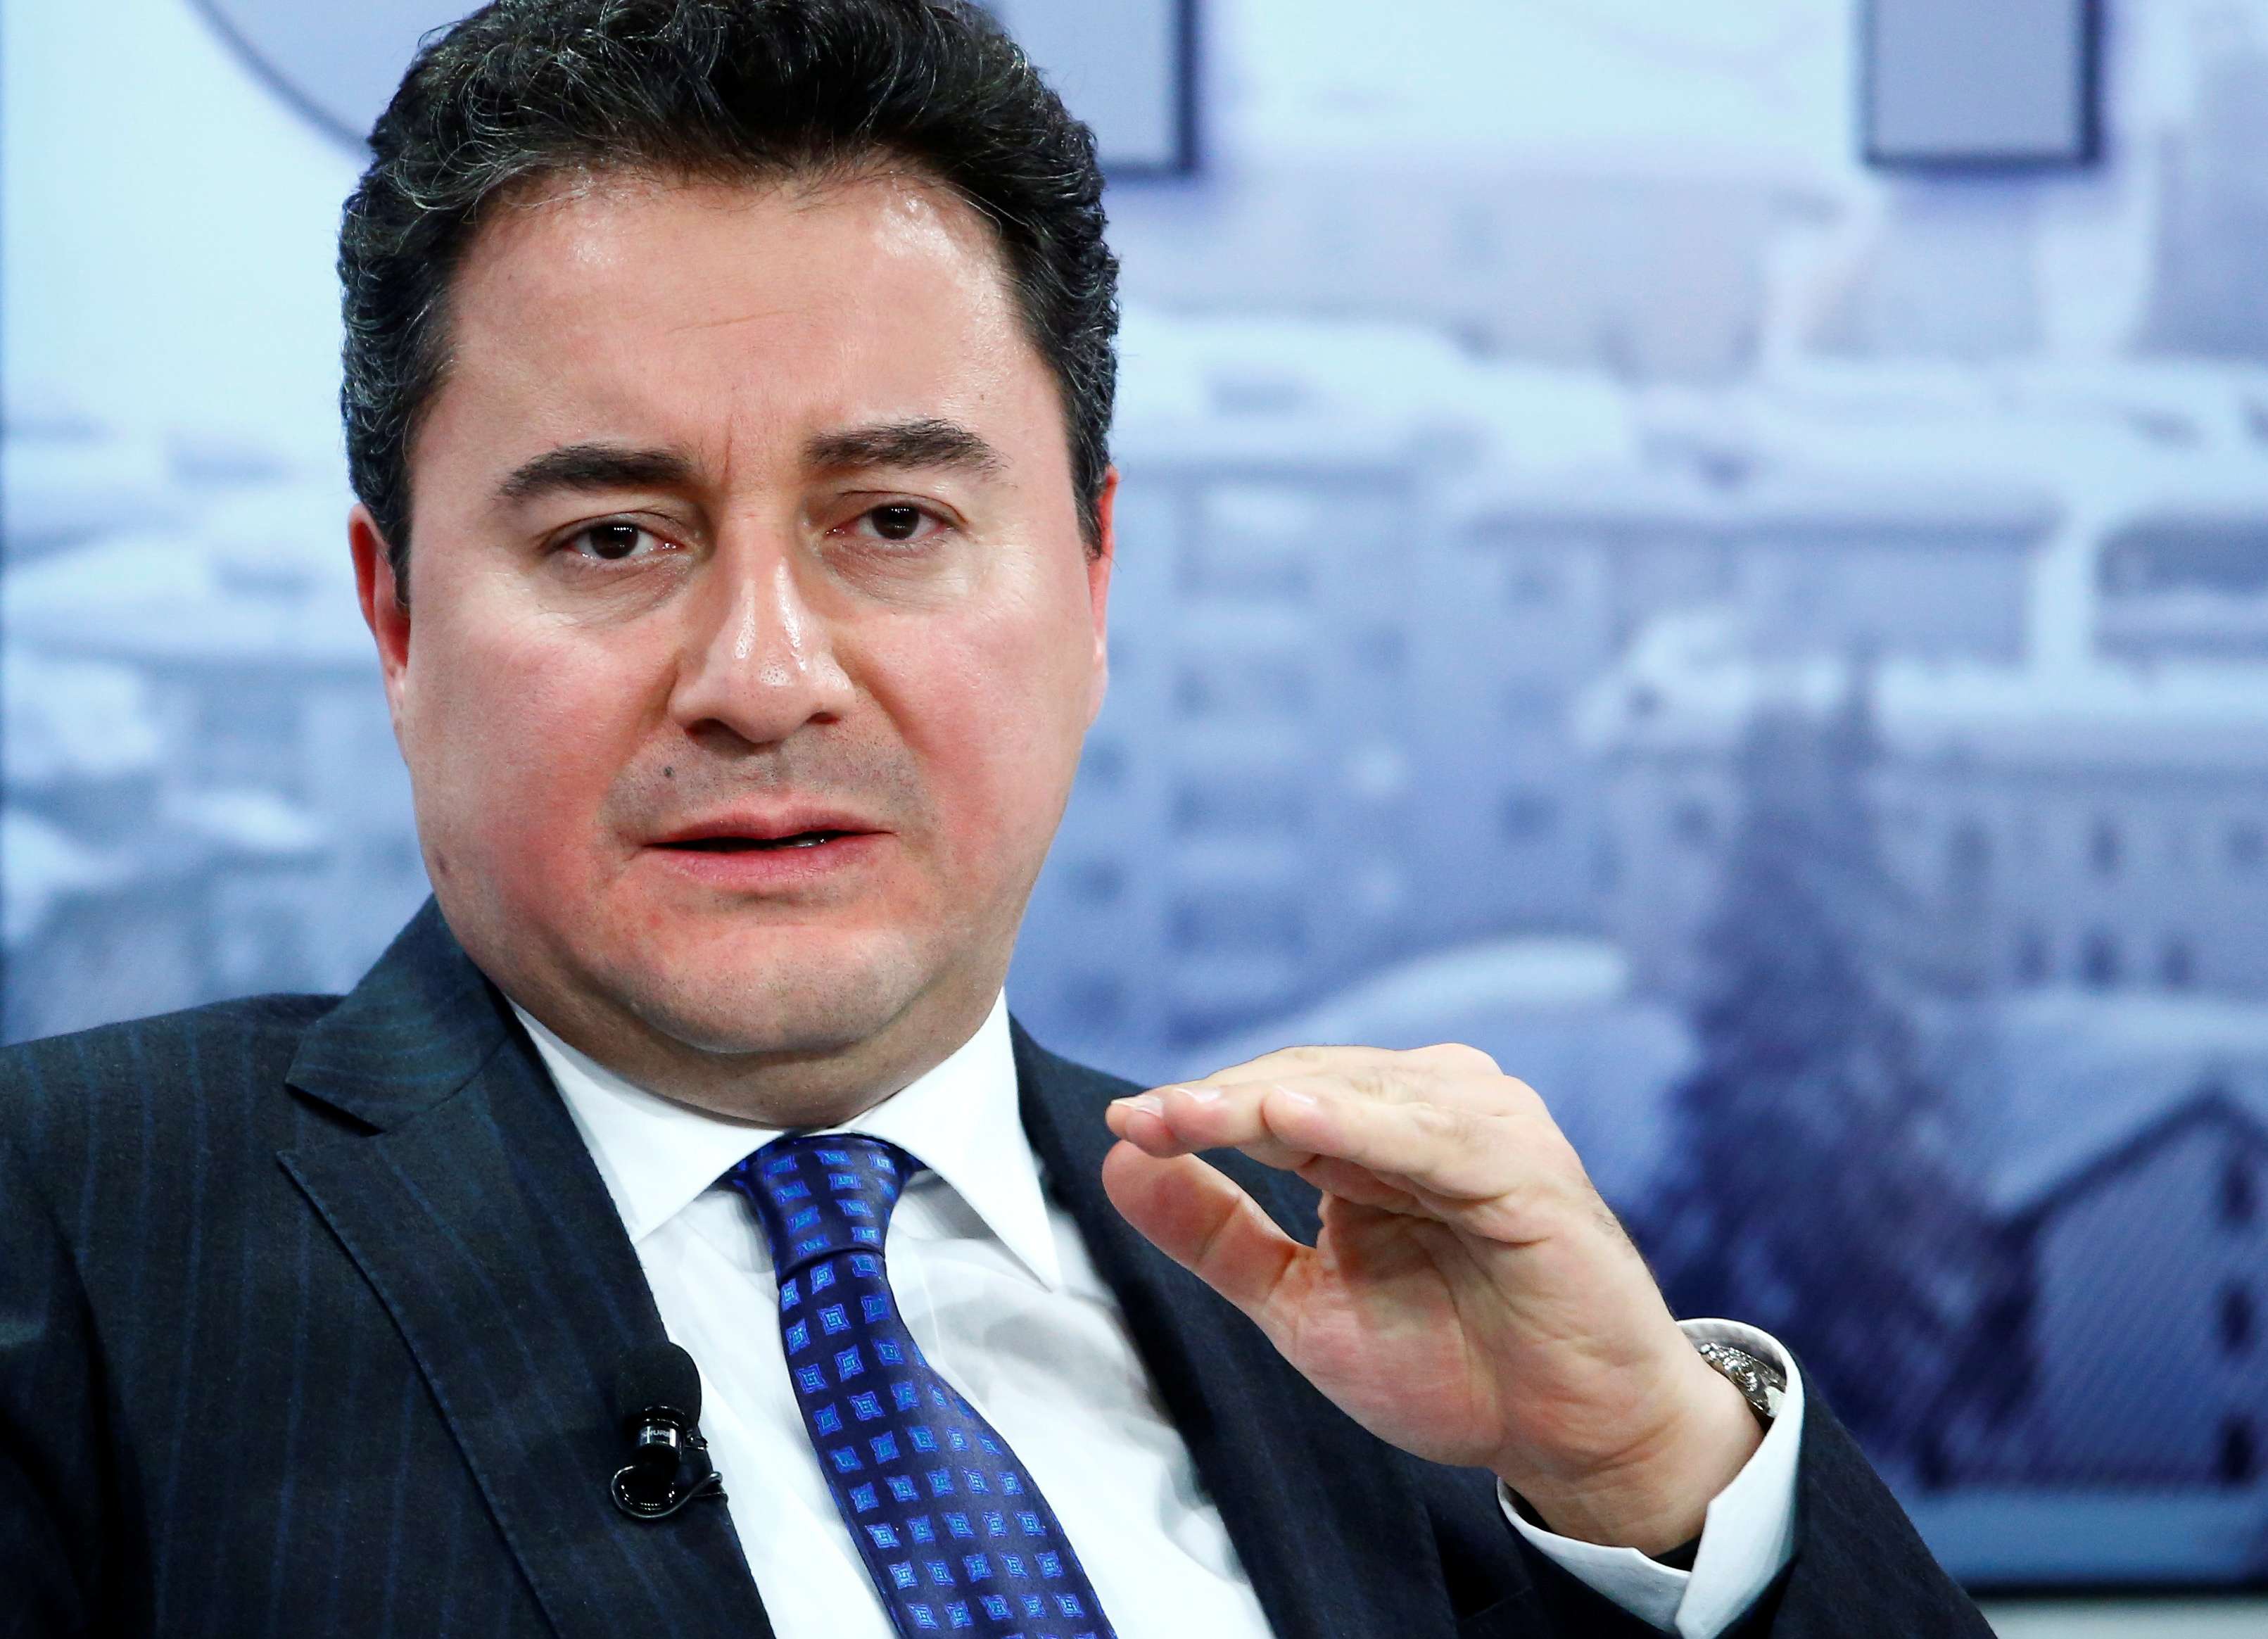 There has been fevered speculation that Babacan will set up his own political party